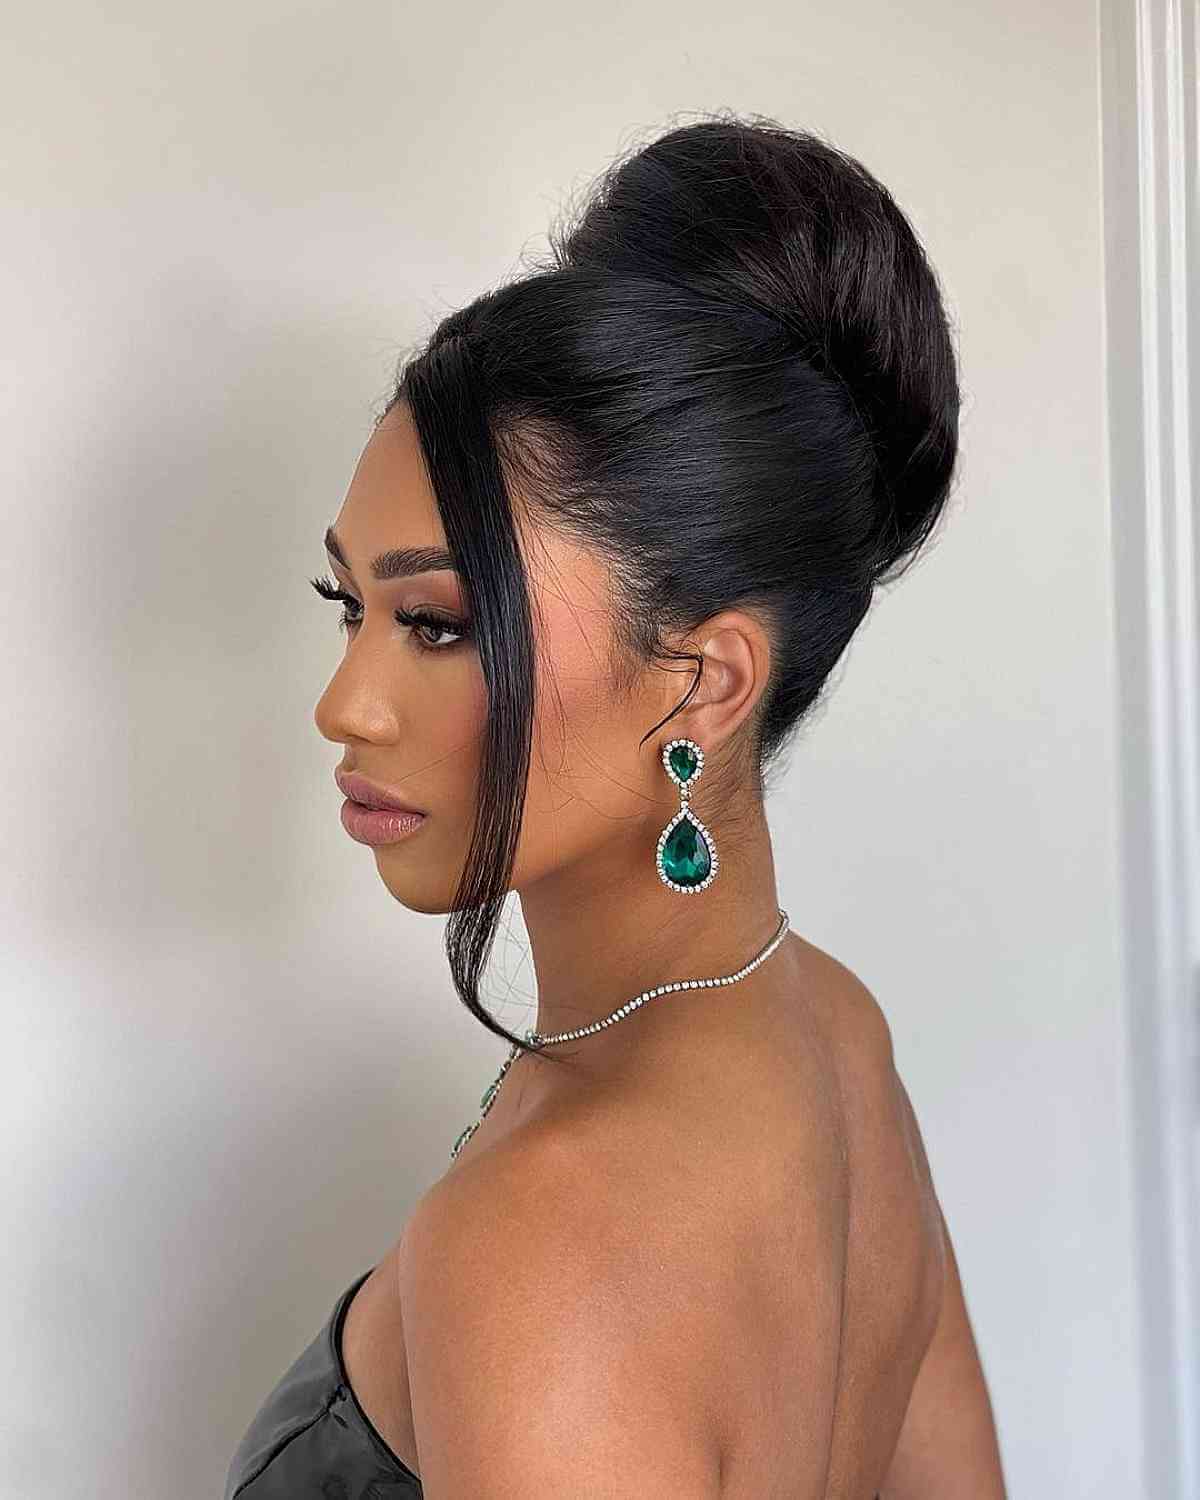 Stunning High Ponytail with Extra Long Bangs for Bridesmaids